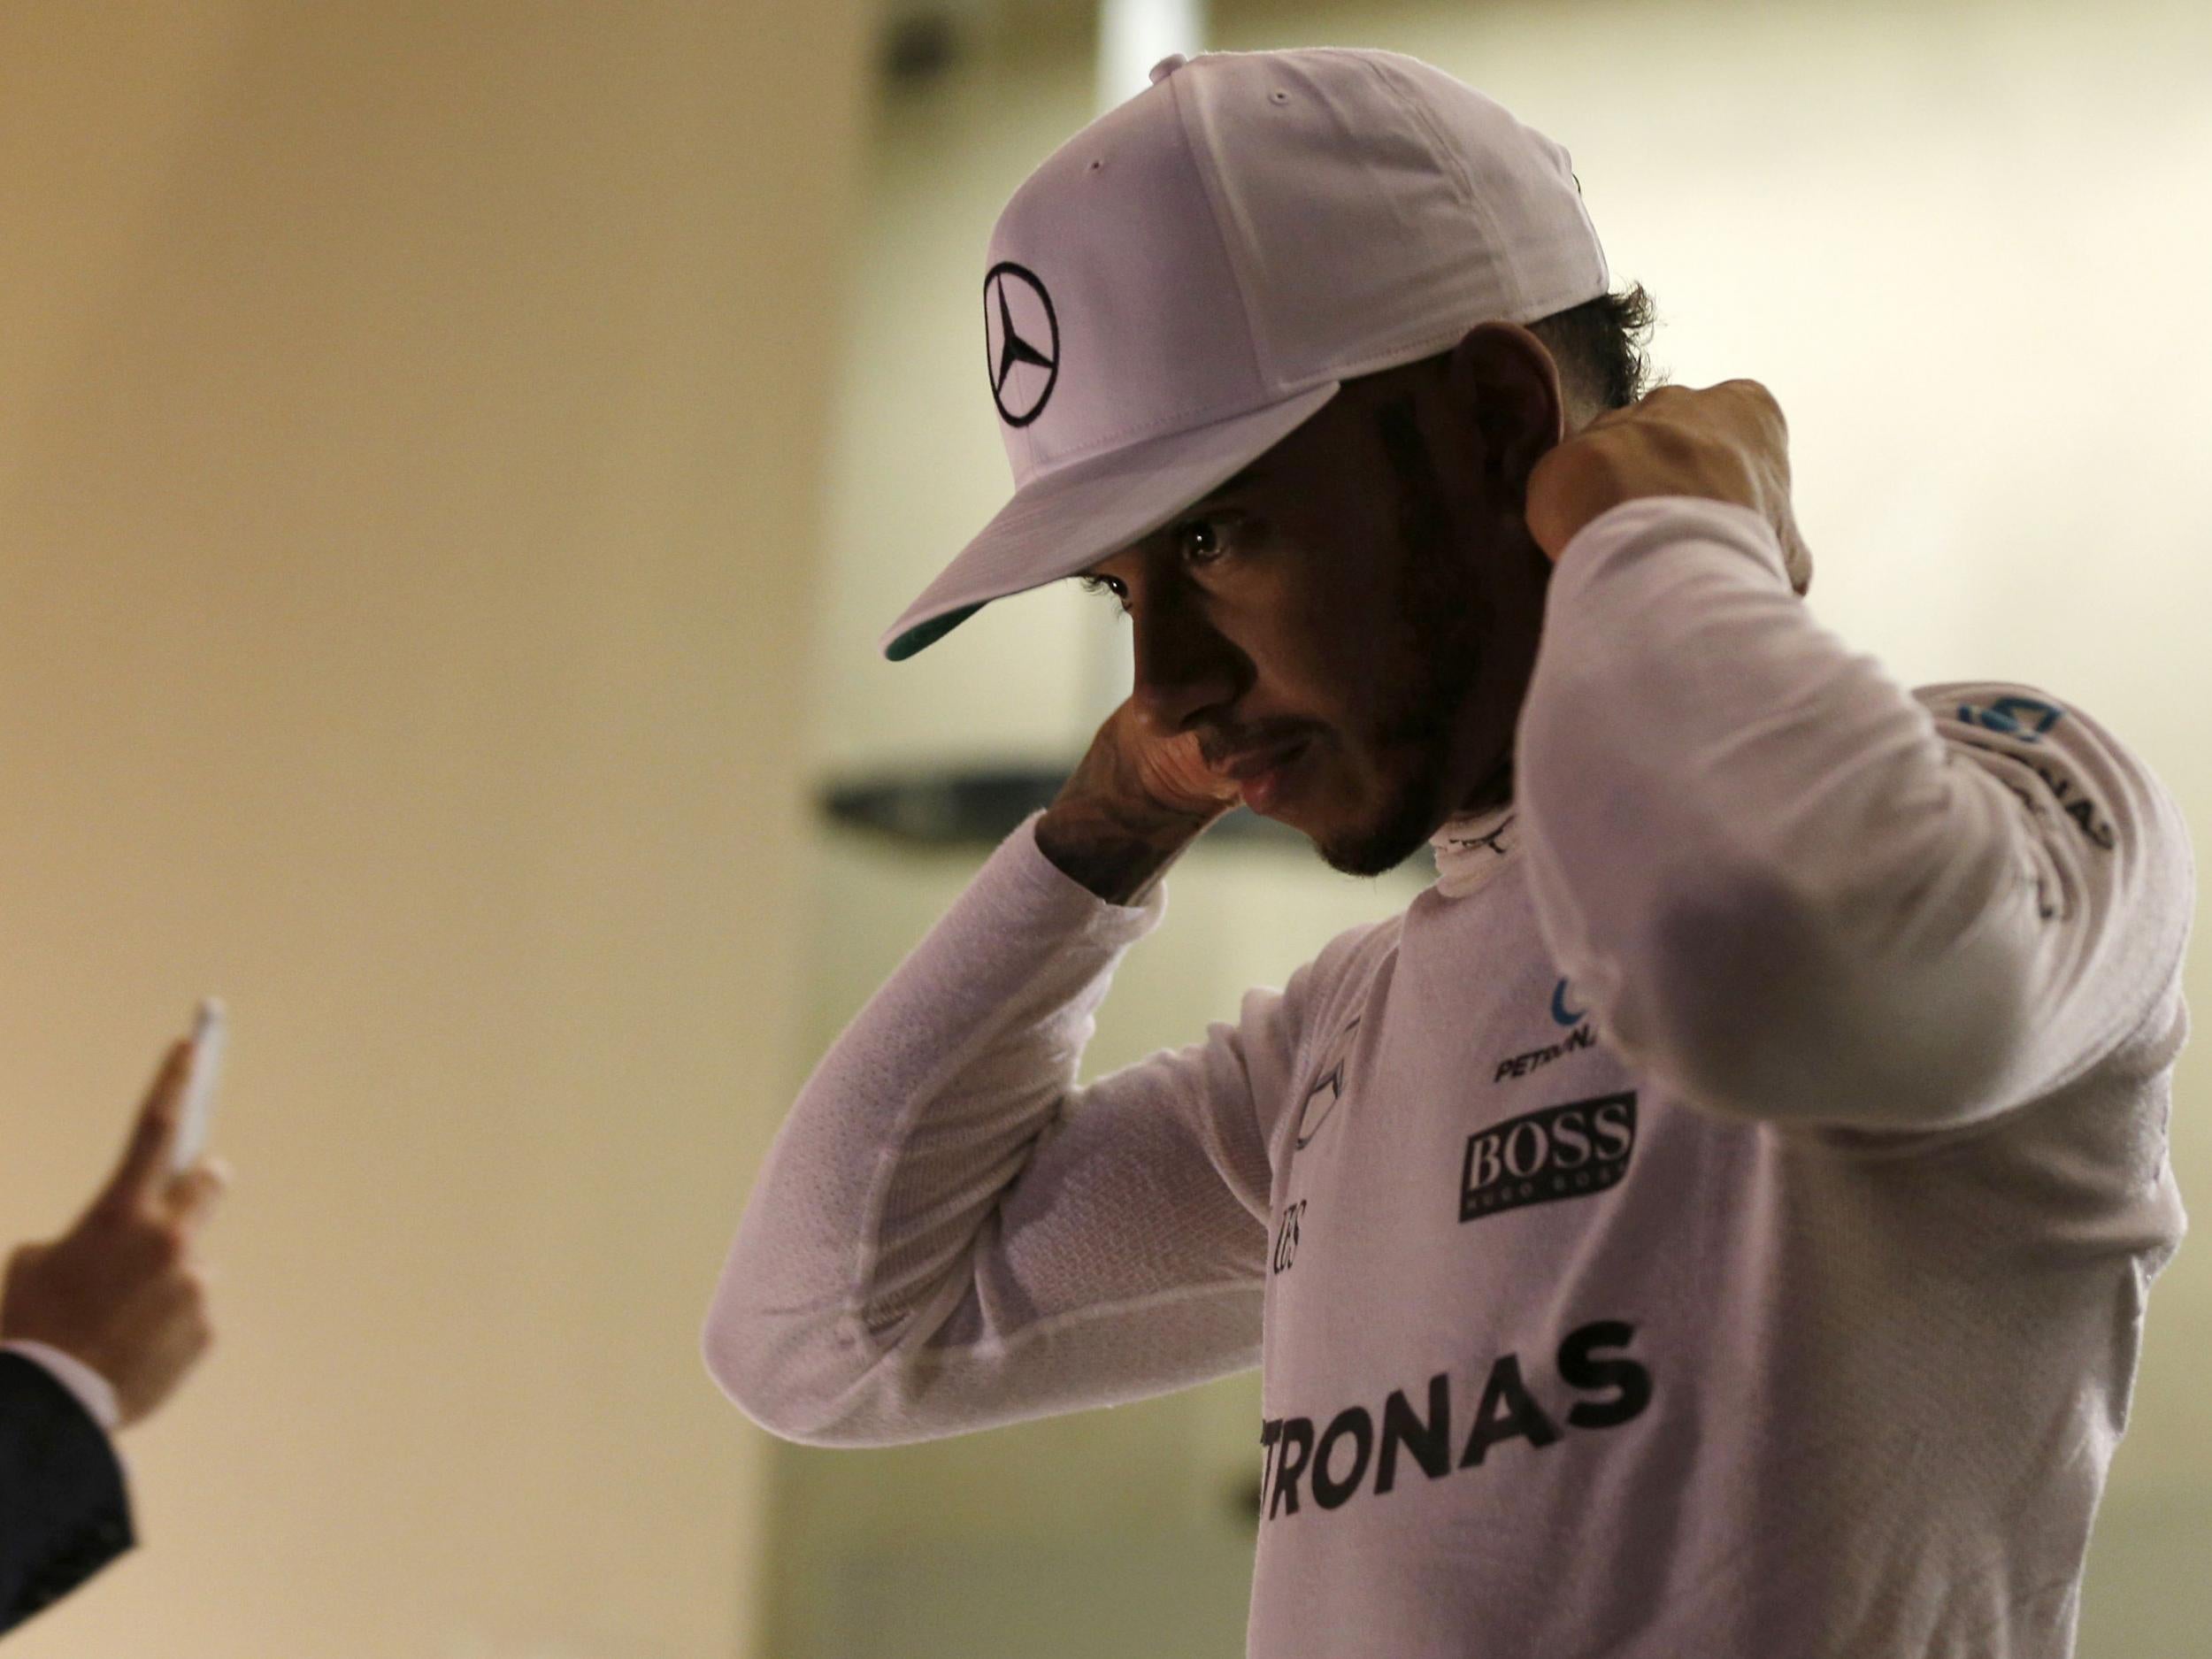 Hamilton has finished on pole in each of the last three races